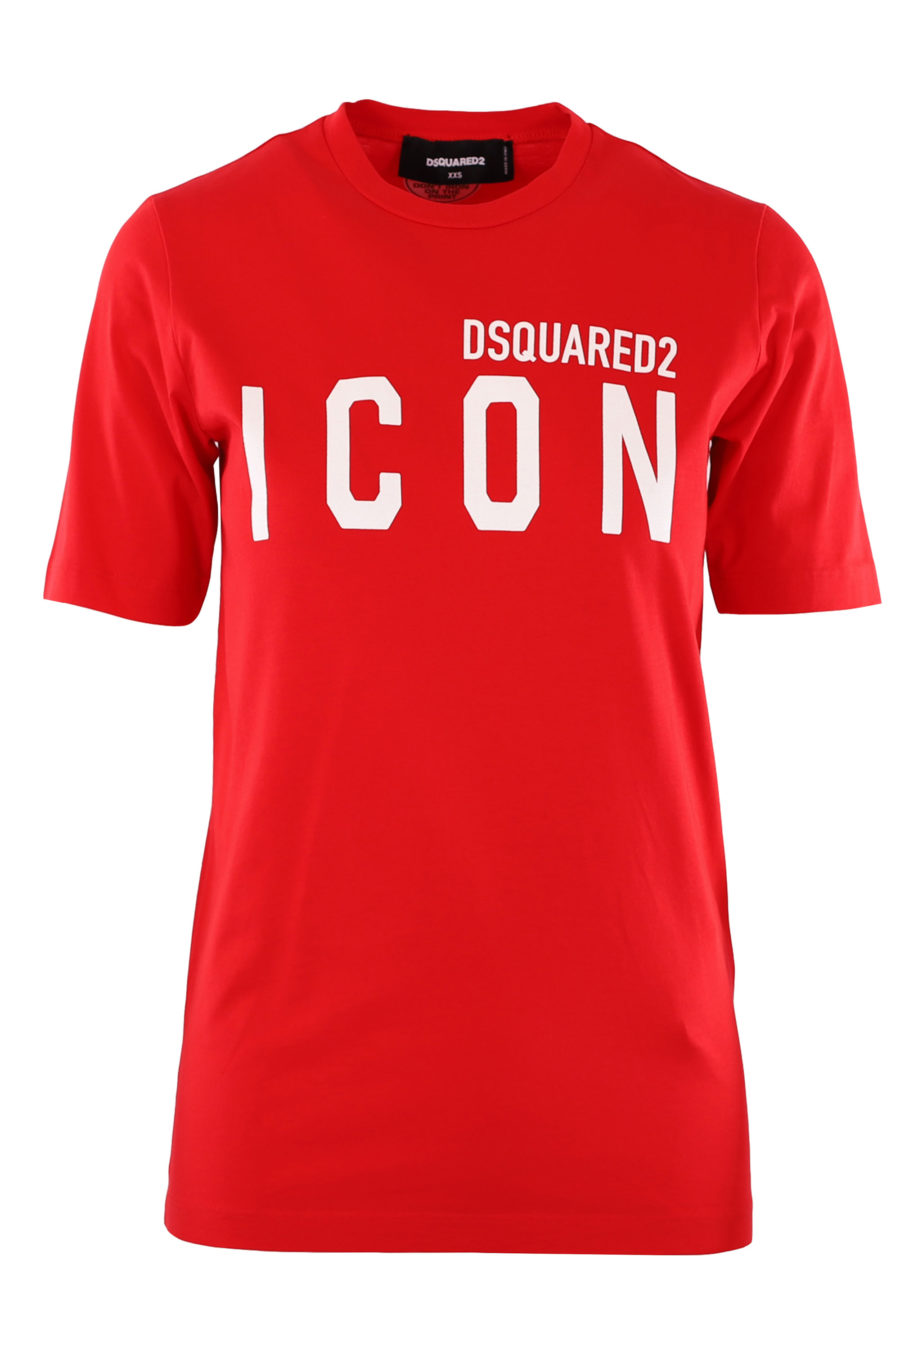 Red T-shirt with white "Icon" logo - IMG 9891